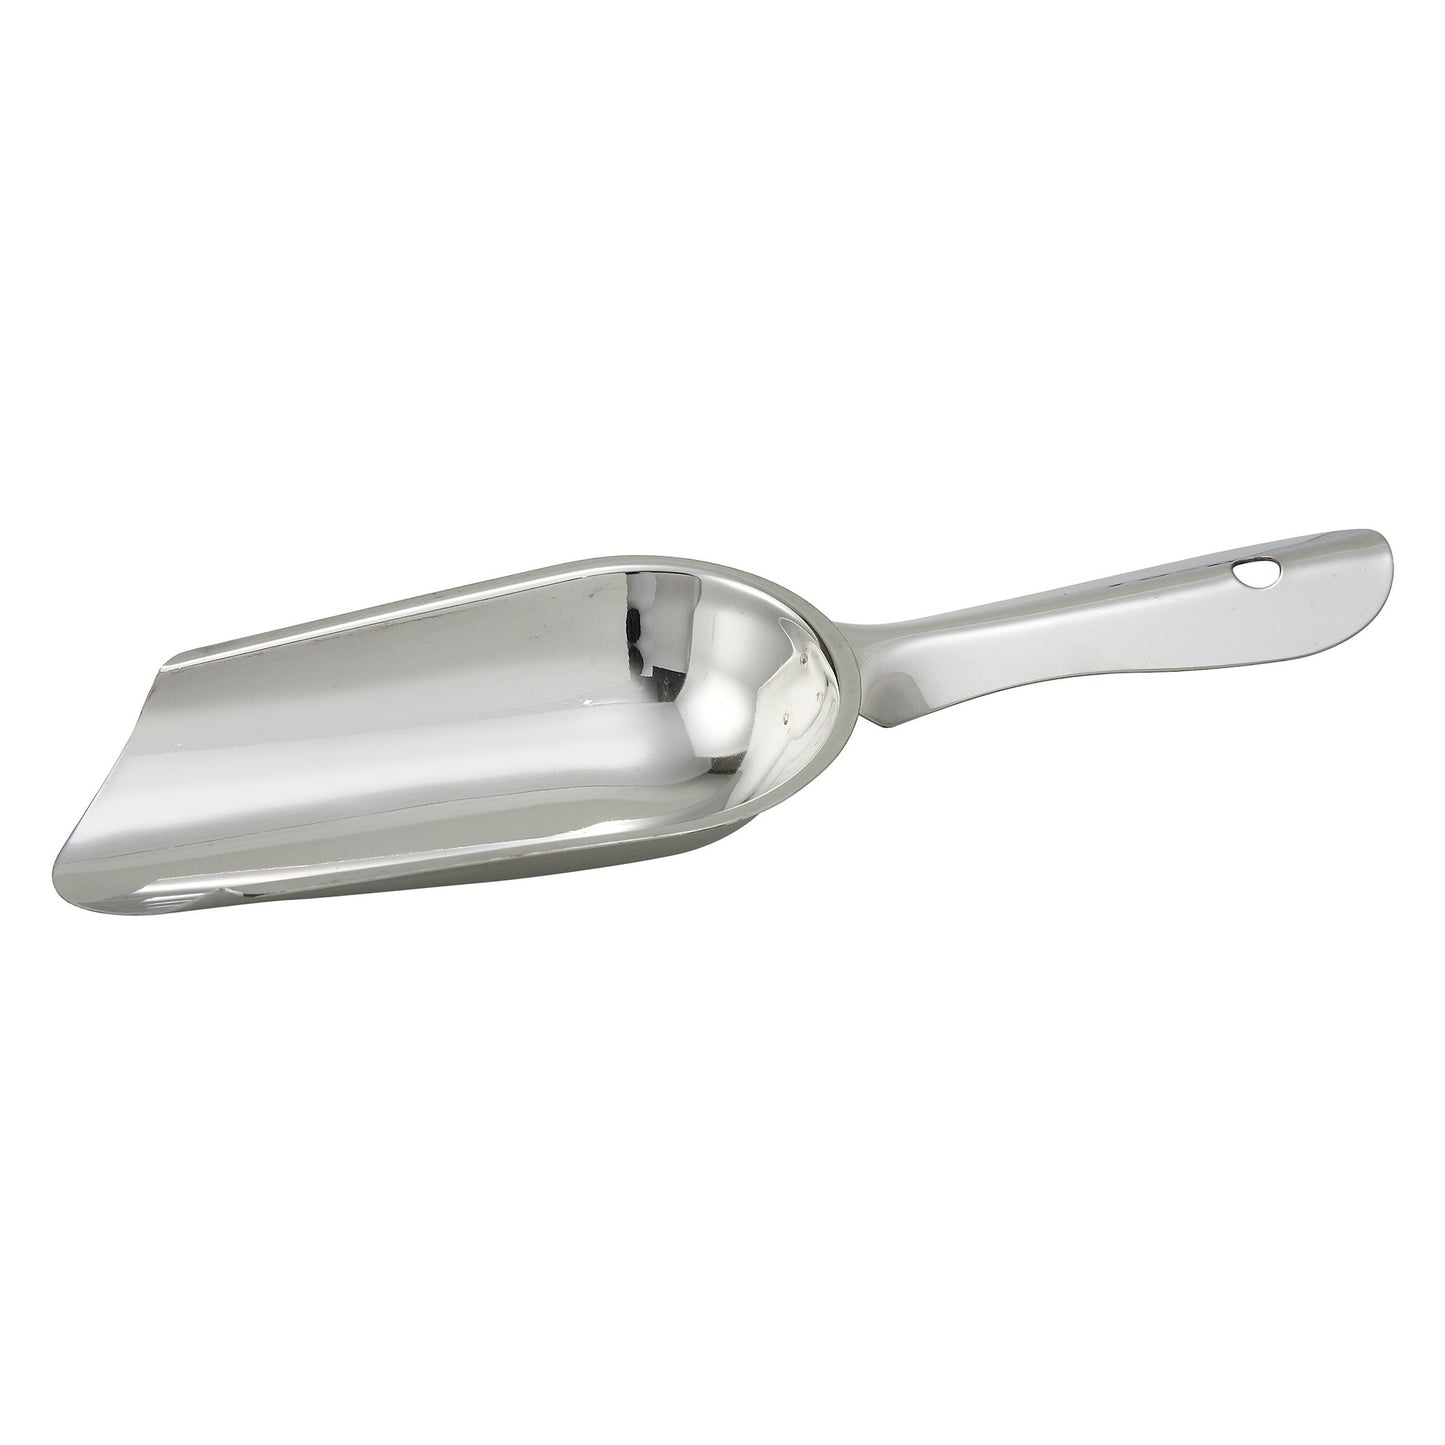 IS-4 - 4 oz Ice Scoop, Stainless Steel